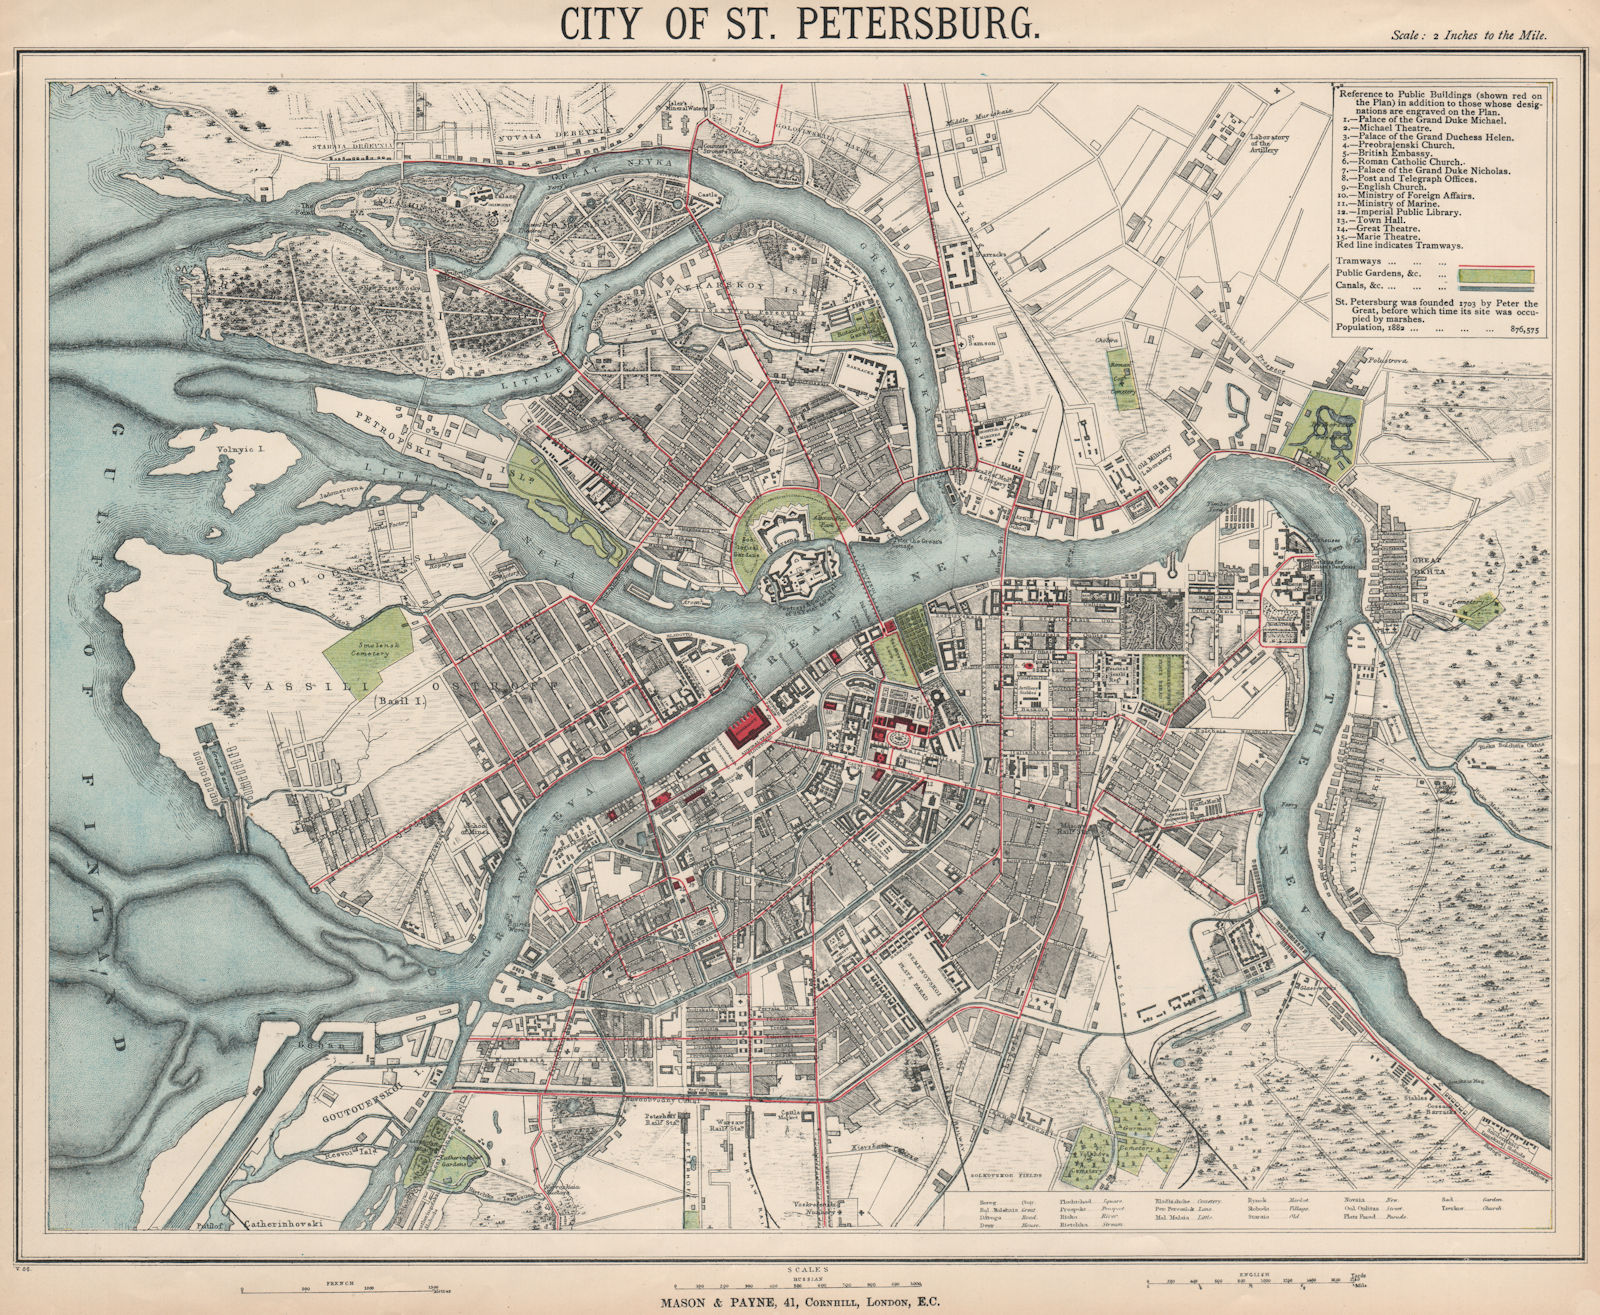 Associate Product ST PETERSBURG Санкт-Петербург. Antique town city map plan. LETTS 1889 old